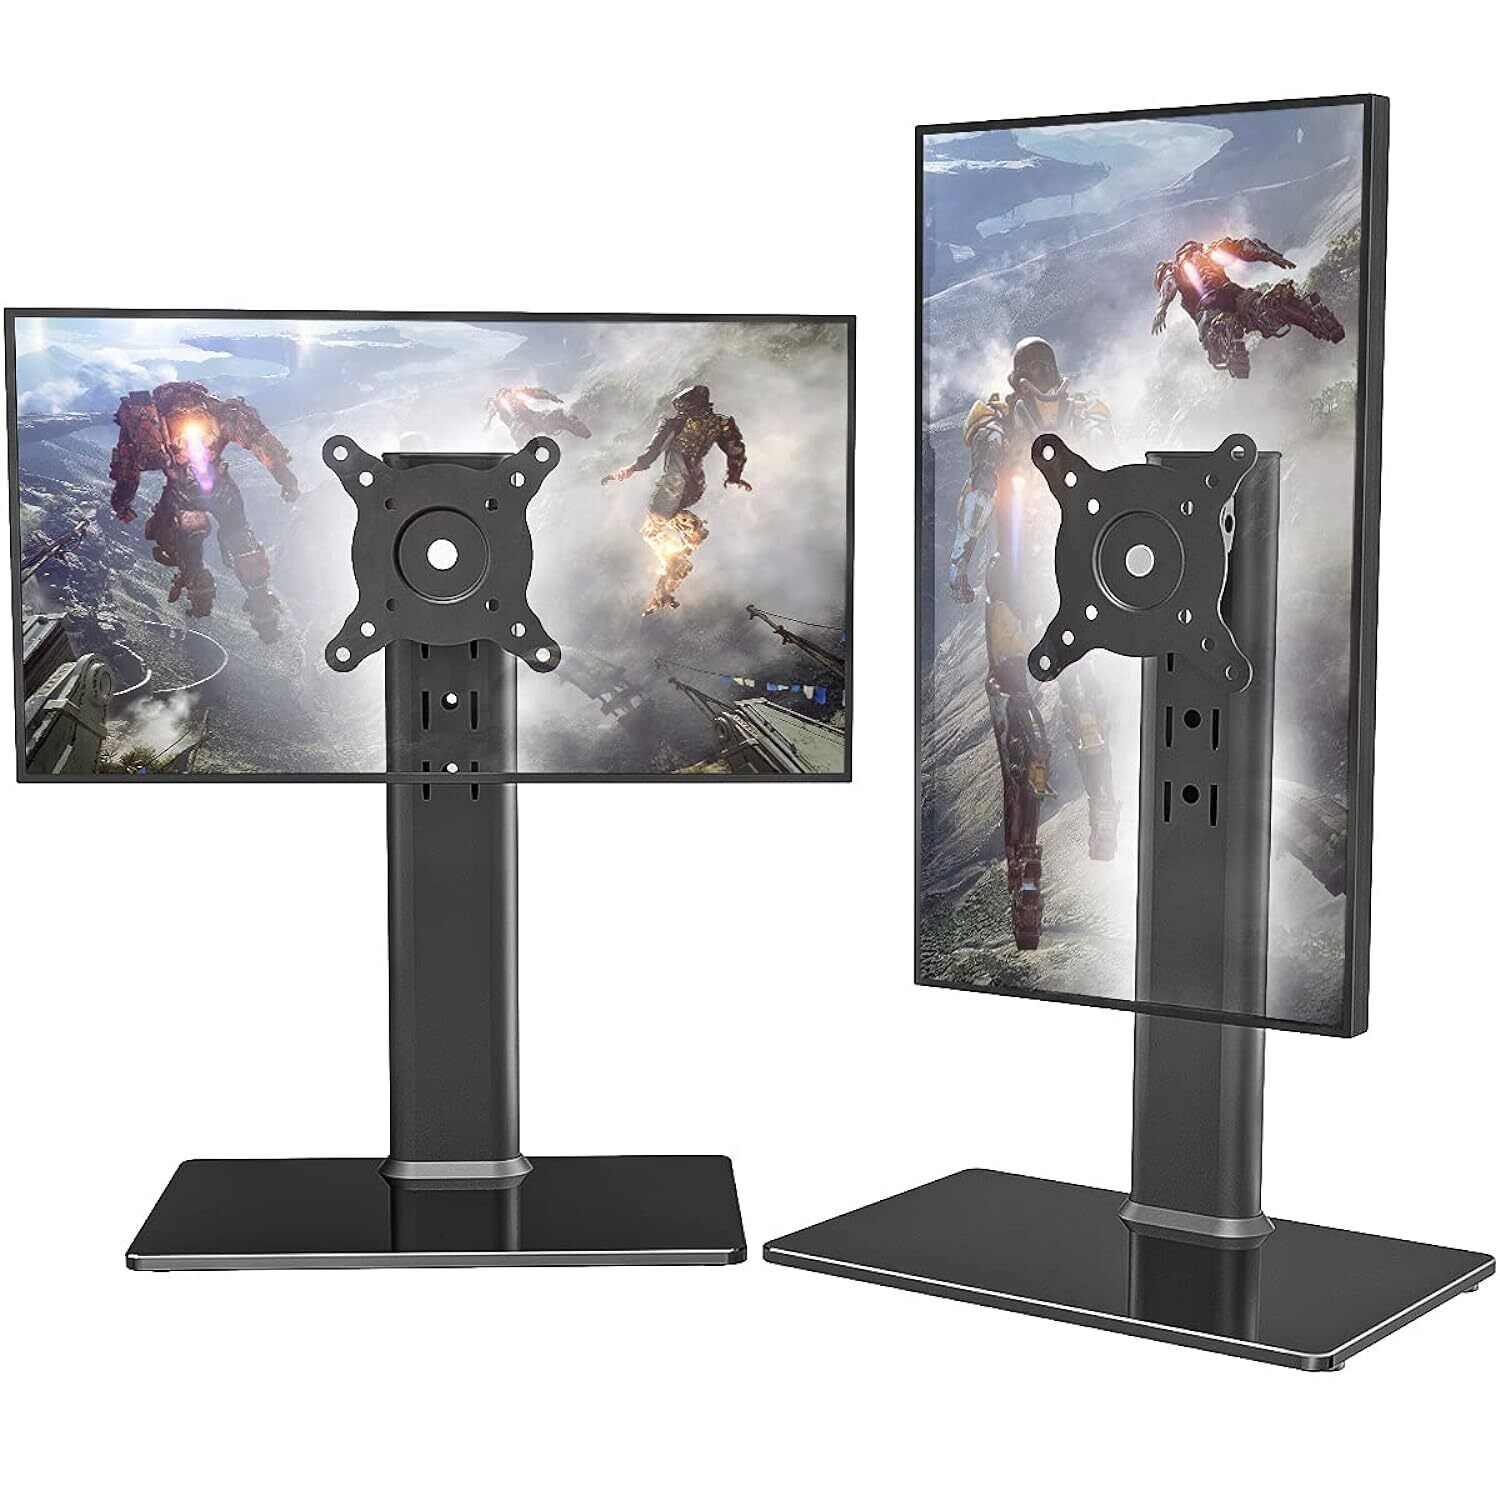 2 Pack Single Lcd Computer Monitor Free-Standing Desk Stand Riser For 13 Inch